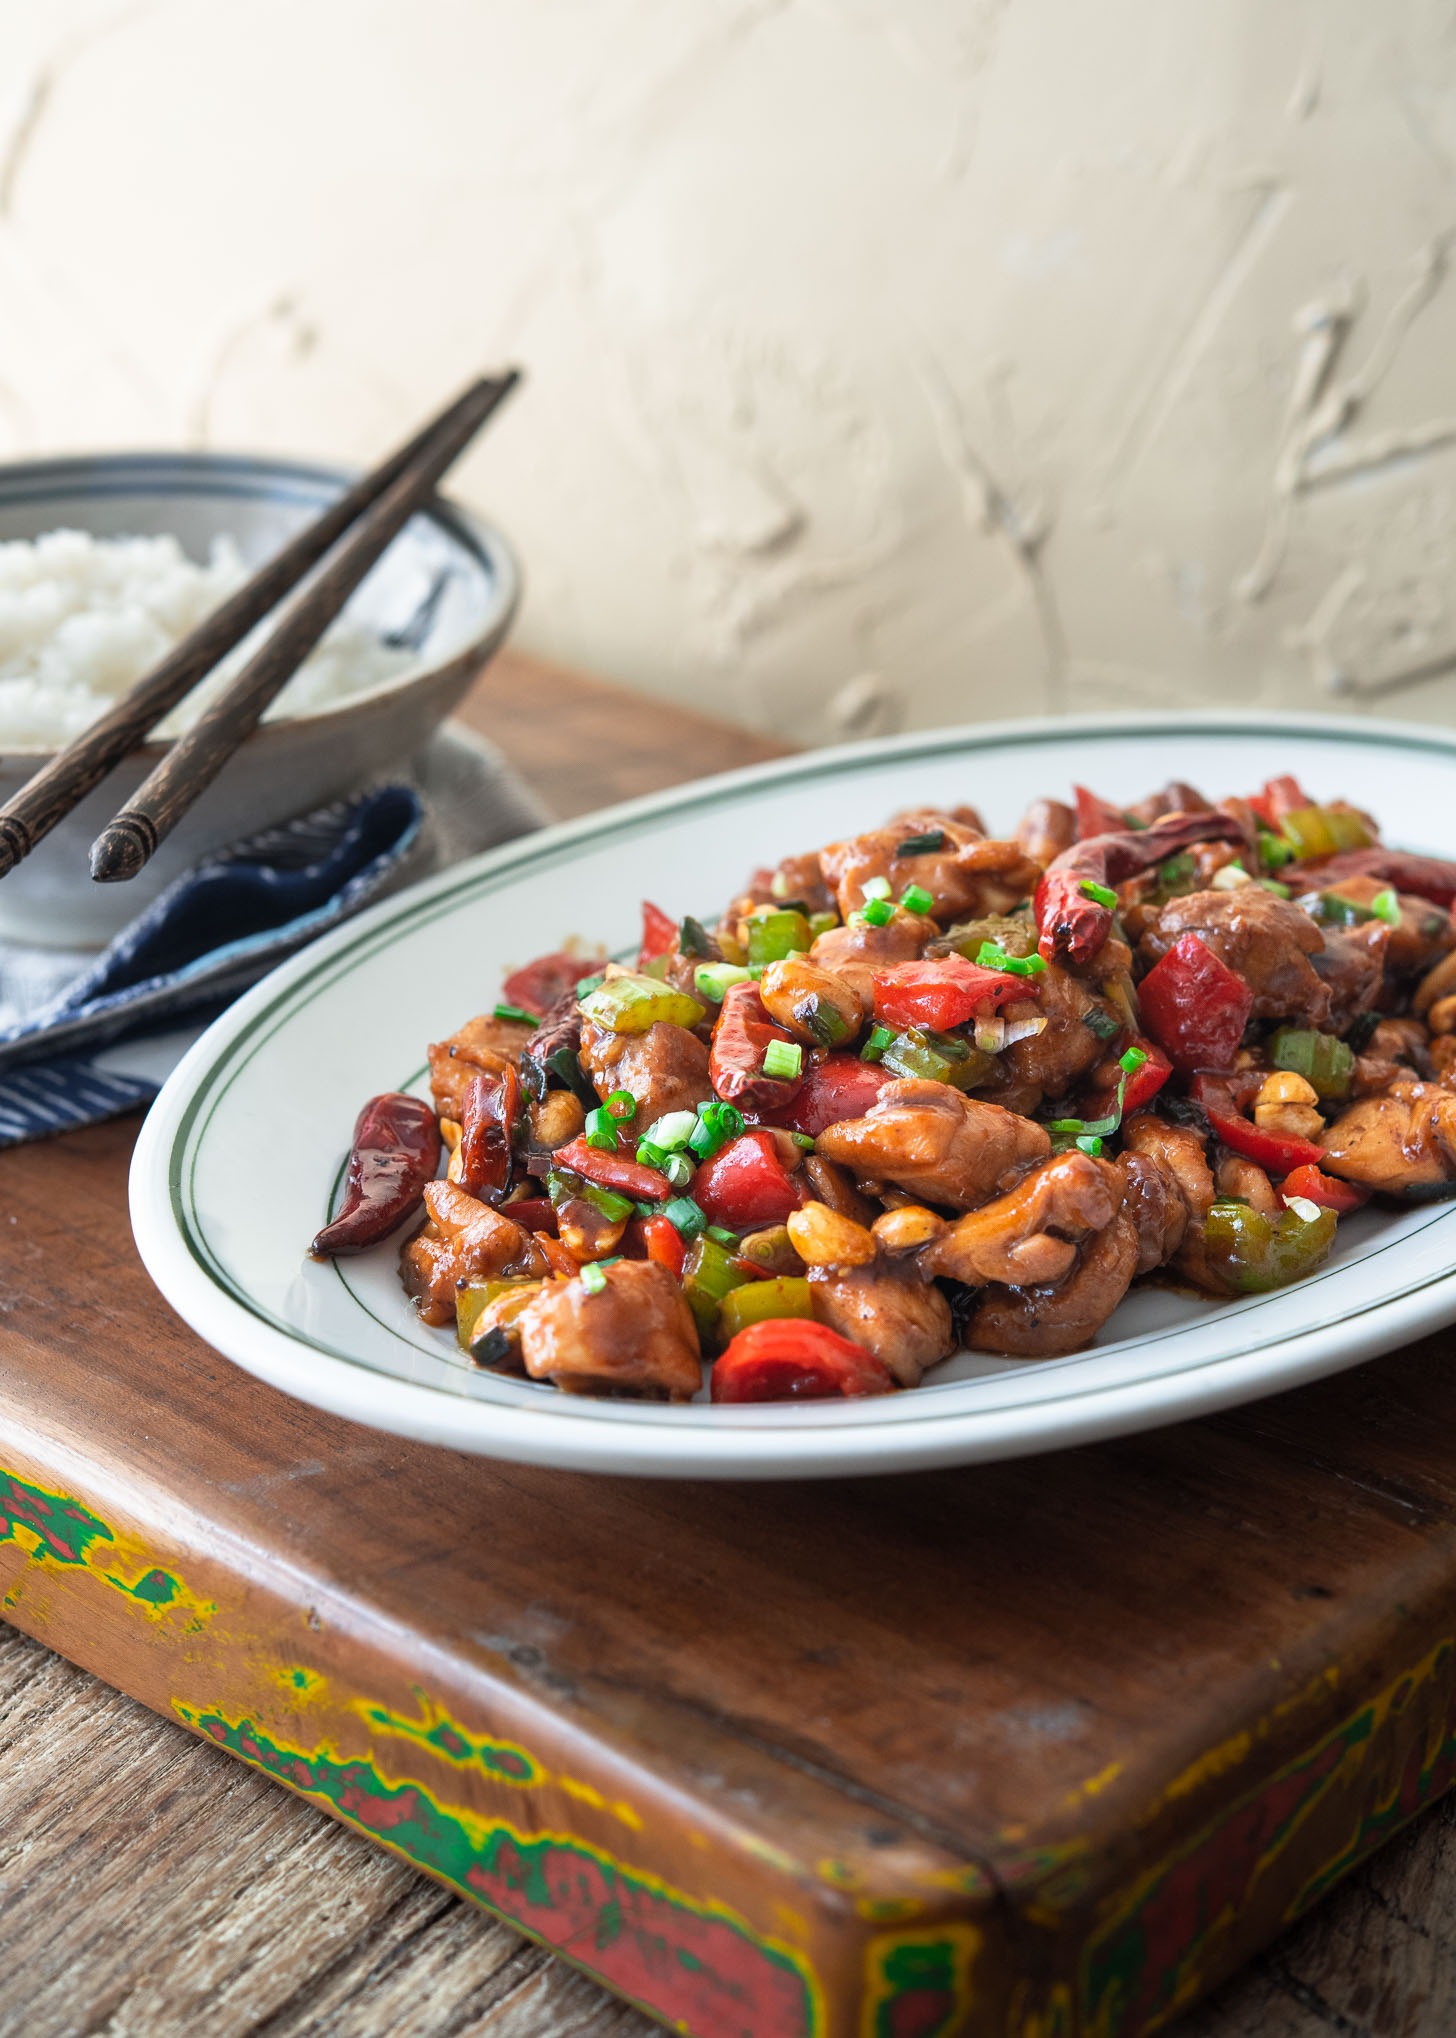 A plate of Kung Pao chicken presented with a bowl of rice.